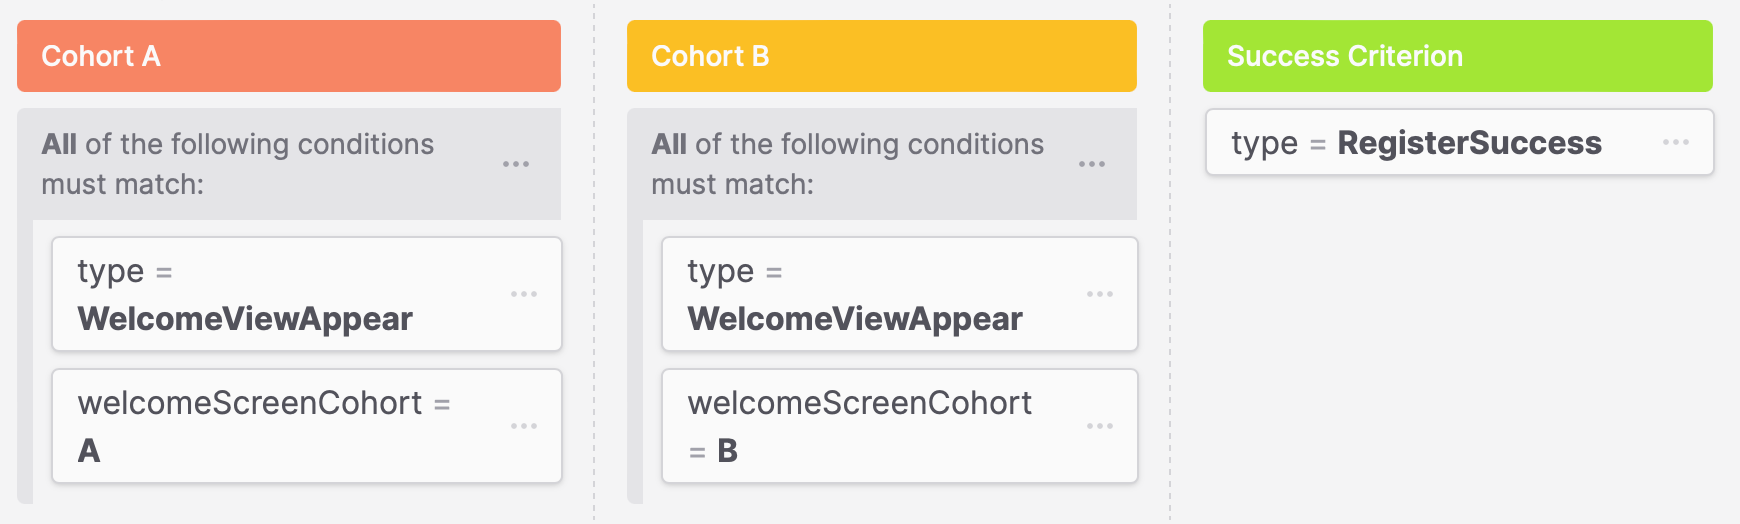 Filters to define Cohorts